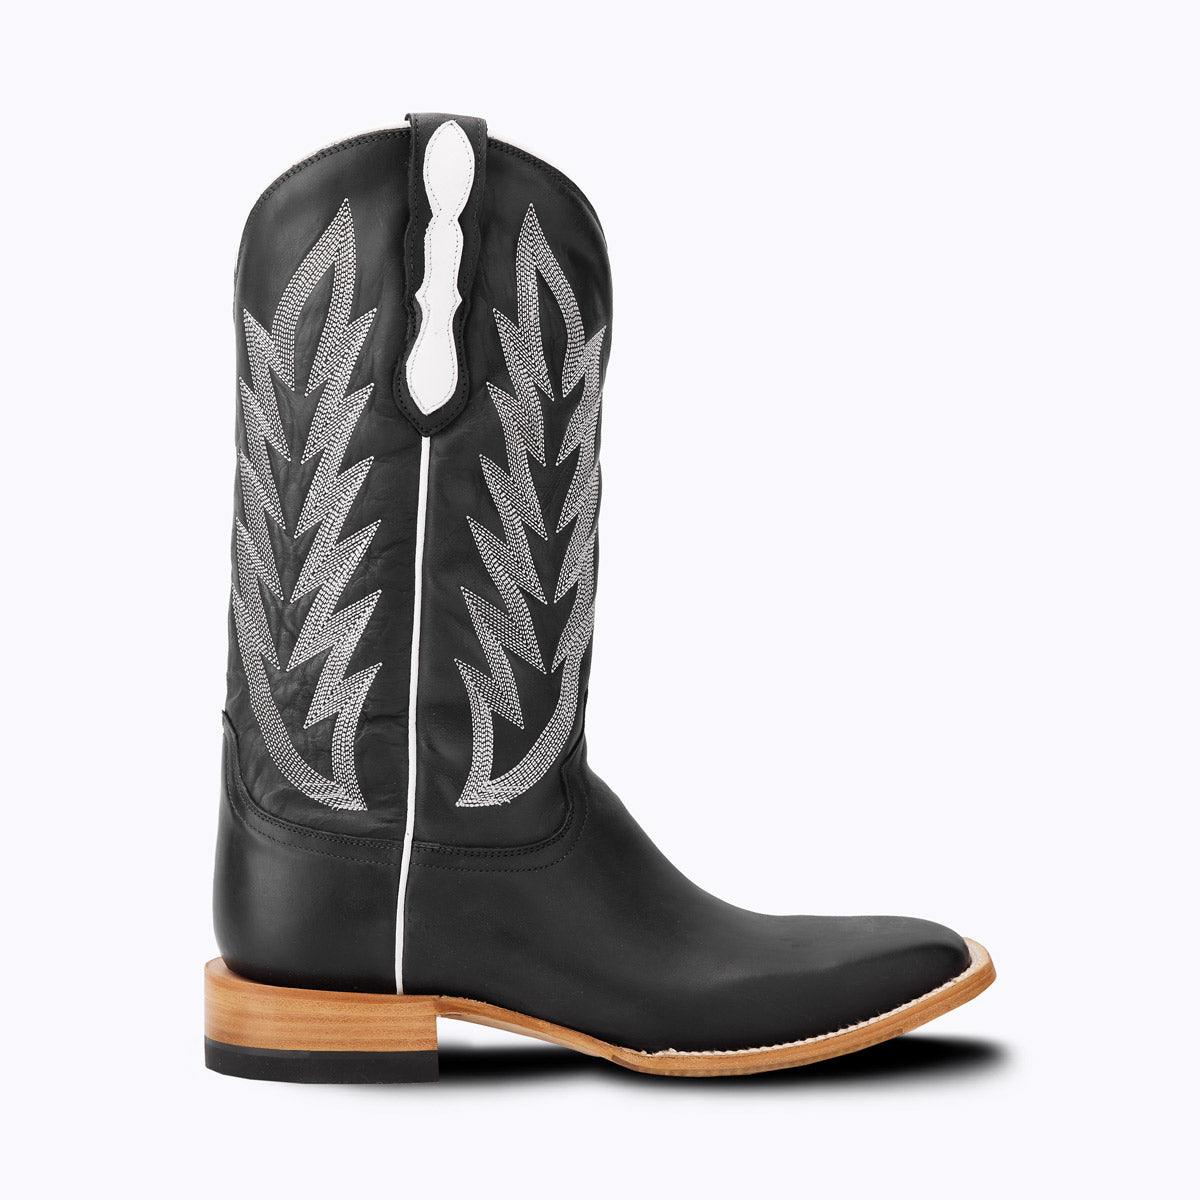 Ft Worth - Sale Mens Western Boot - Capitan Boots